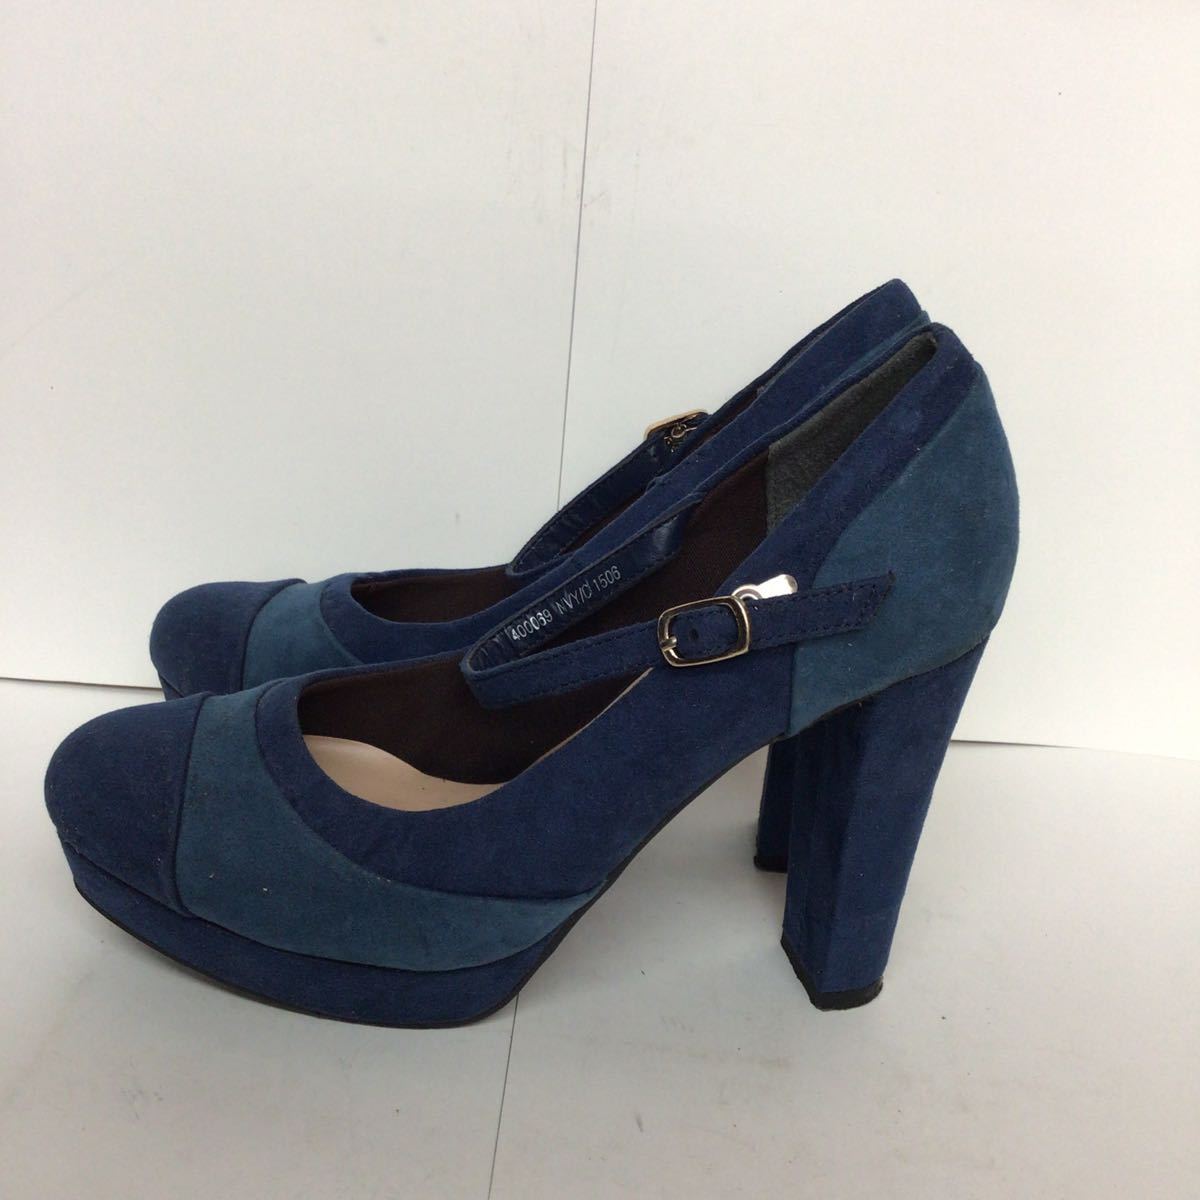 [ selling out! free shipping!]A-332 feminincafe! pumps!23.5cm! suede! navy! blue! blue! stylish! lovely! high heel! used 